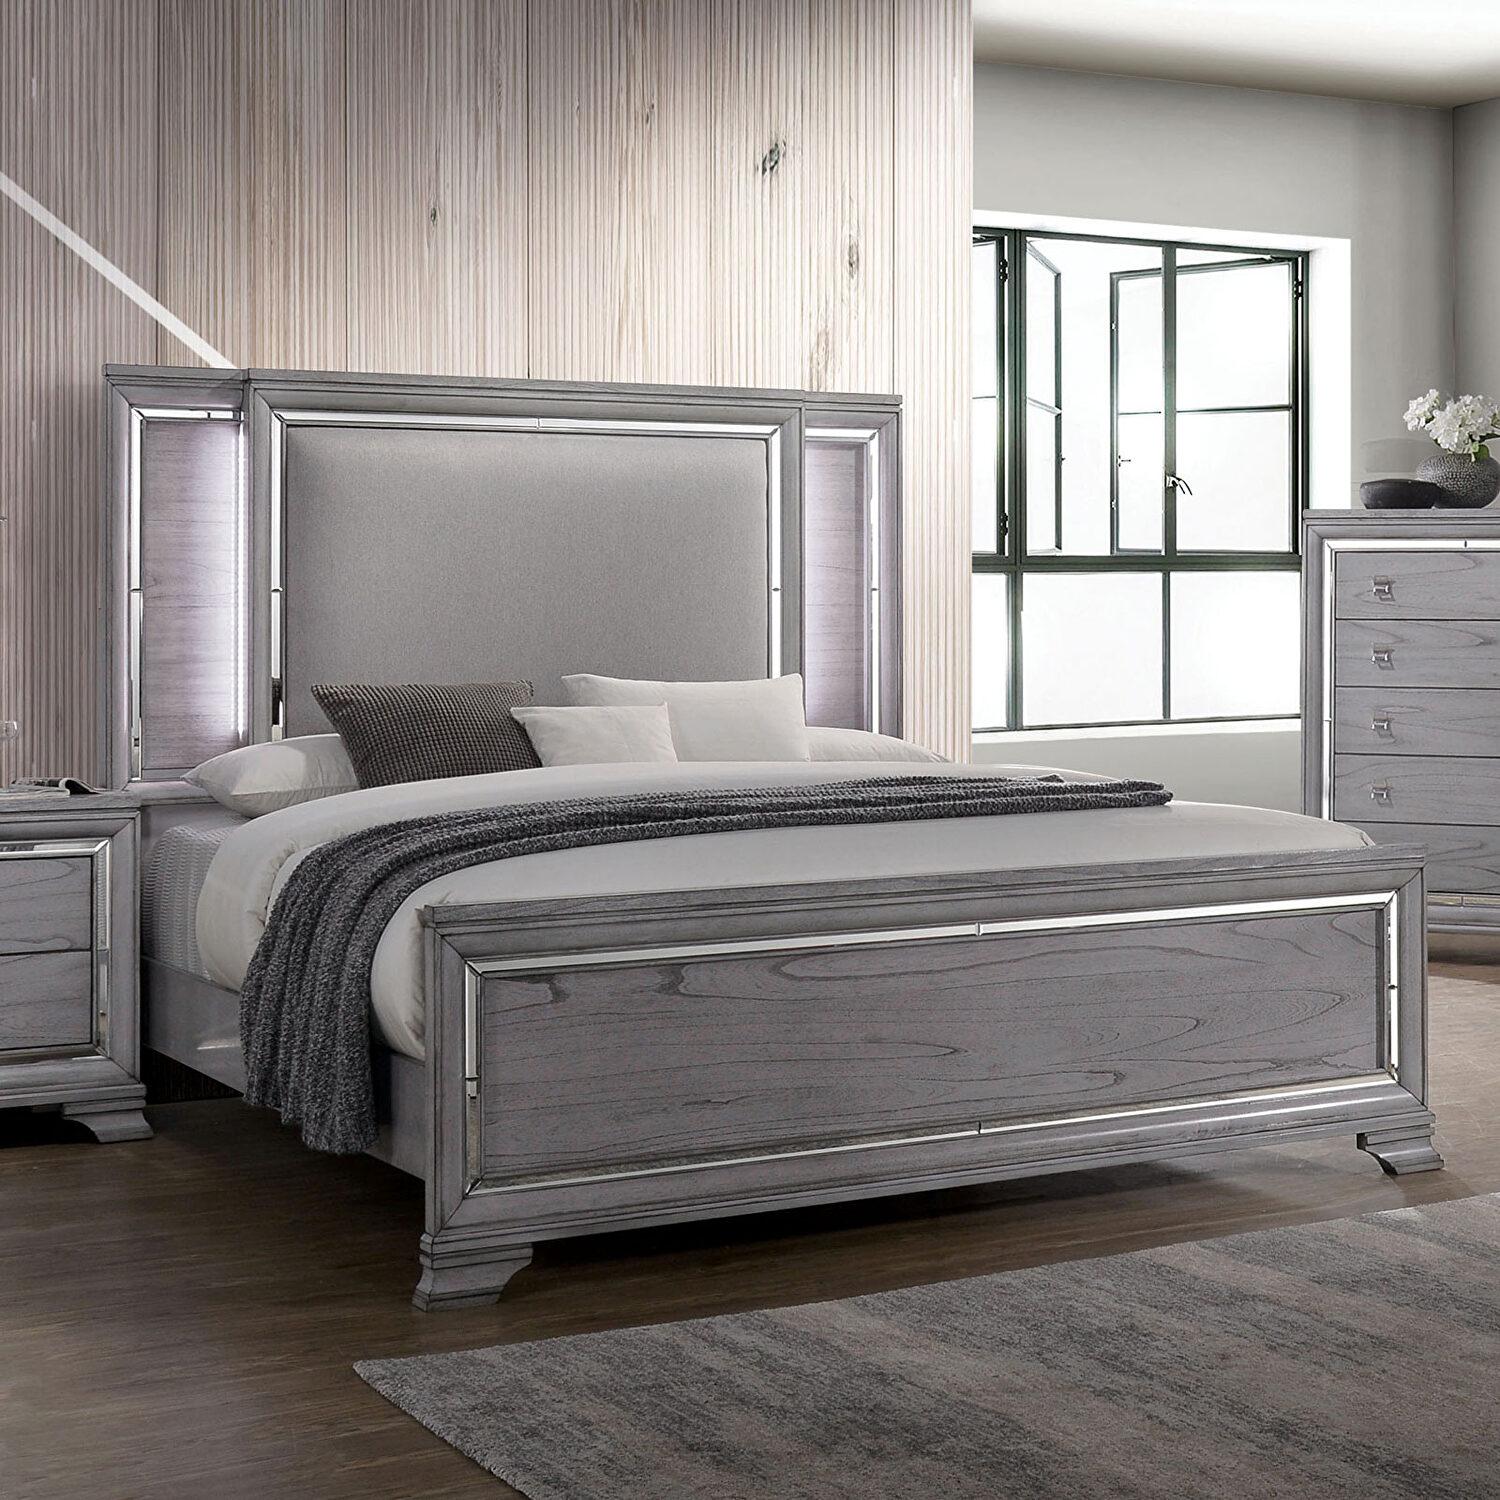 

    
Contemporary Light Gray Solid Wood Queen Bedroom Set 5pcs Furniture of America CM7579 Alanis
